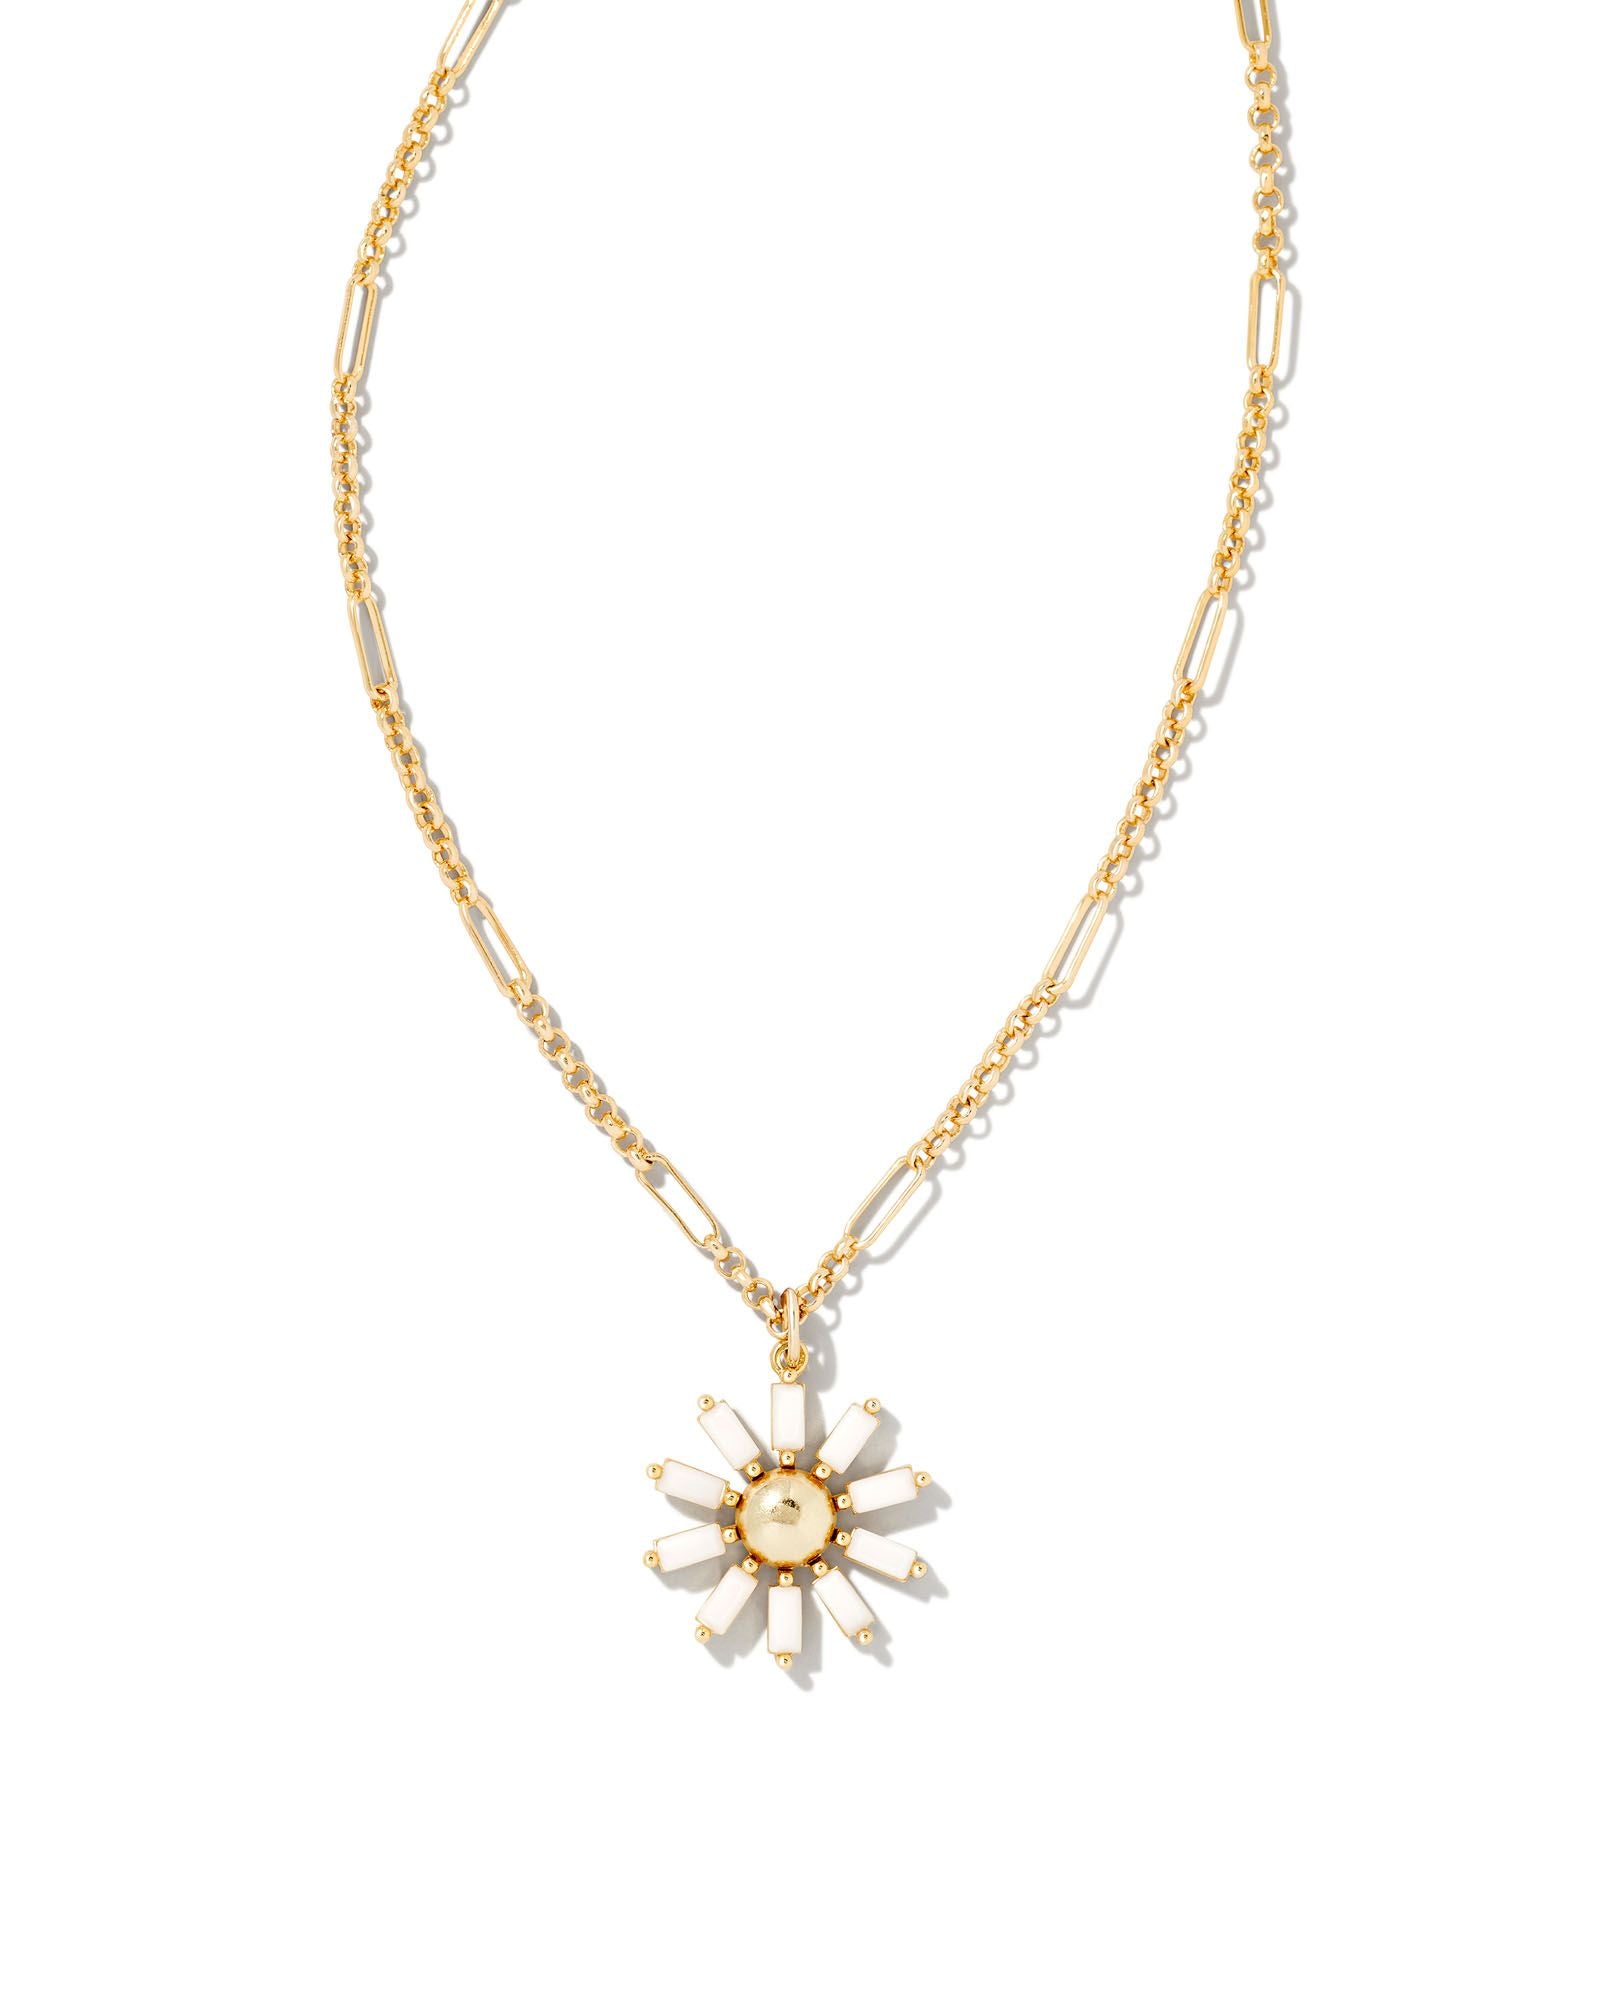 Kendra Scott Madison Daisy Short Pendant Necklace In Gold White Opaque Glass.